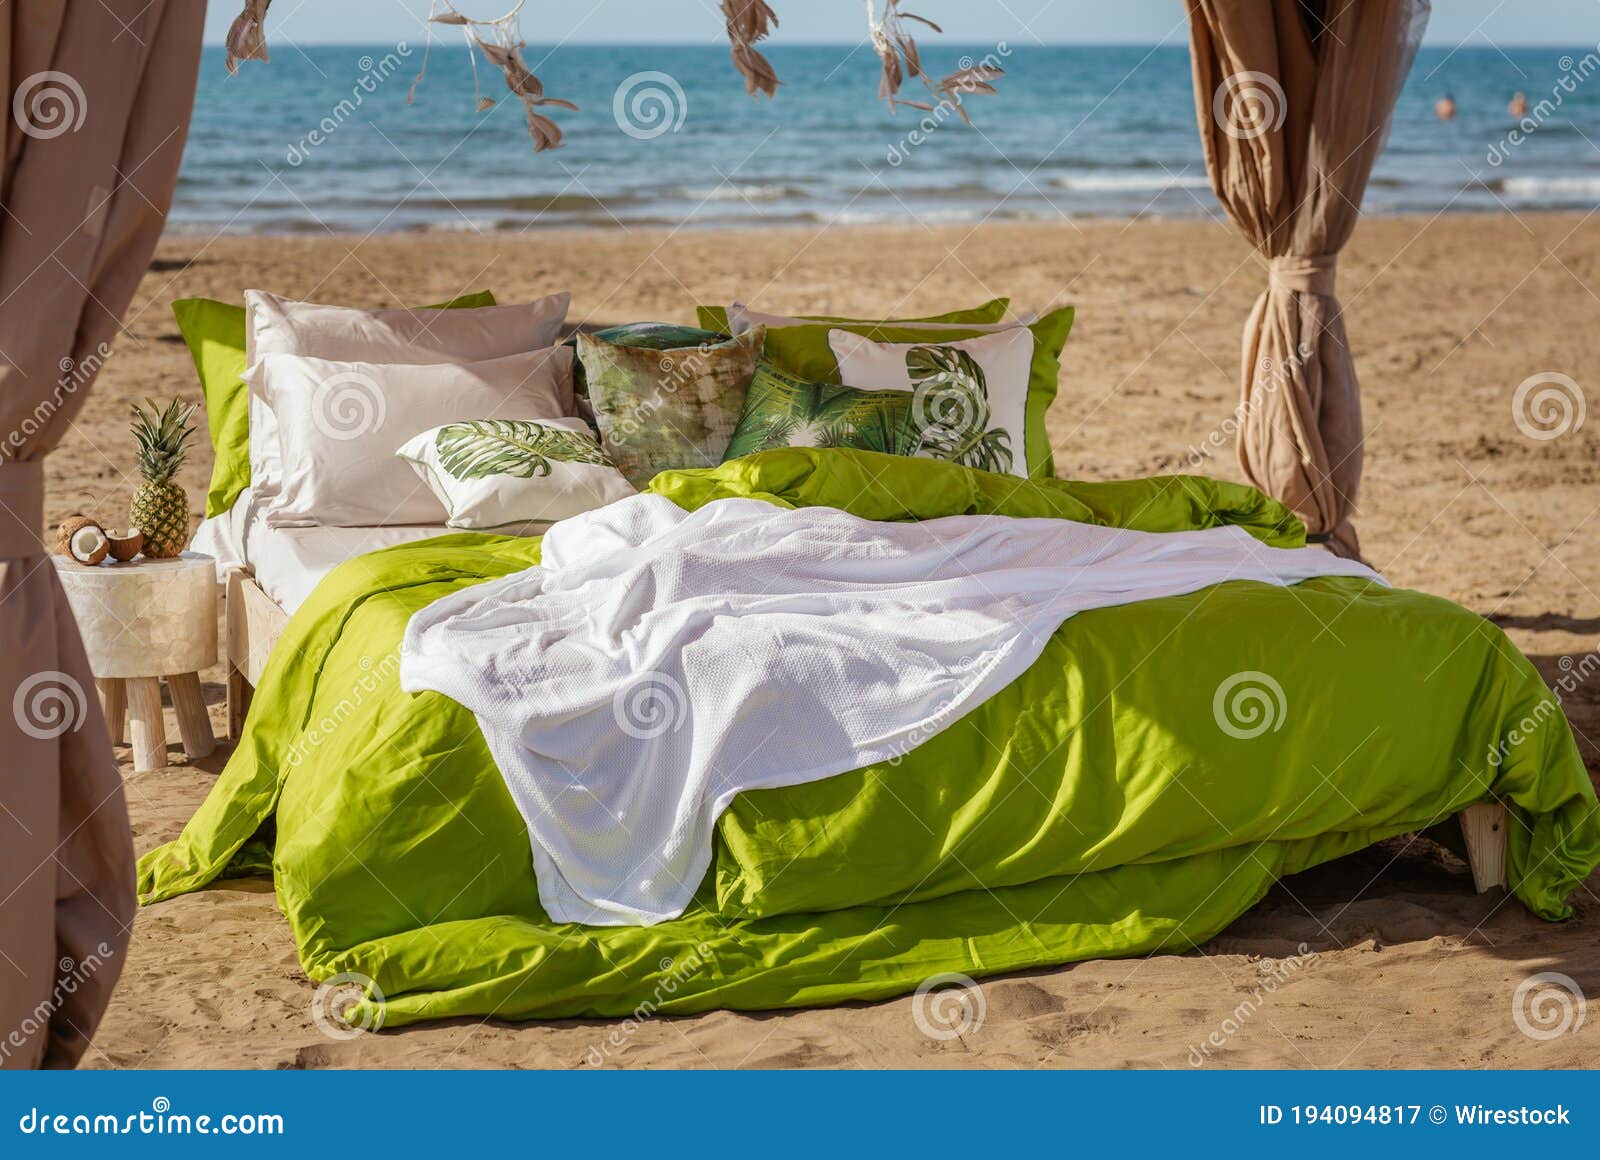 Cozy Bed on a Beach in Green Bed Linen Stock Image - Image of relax ...